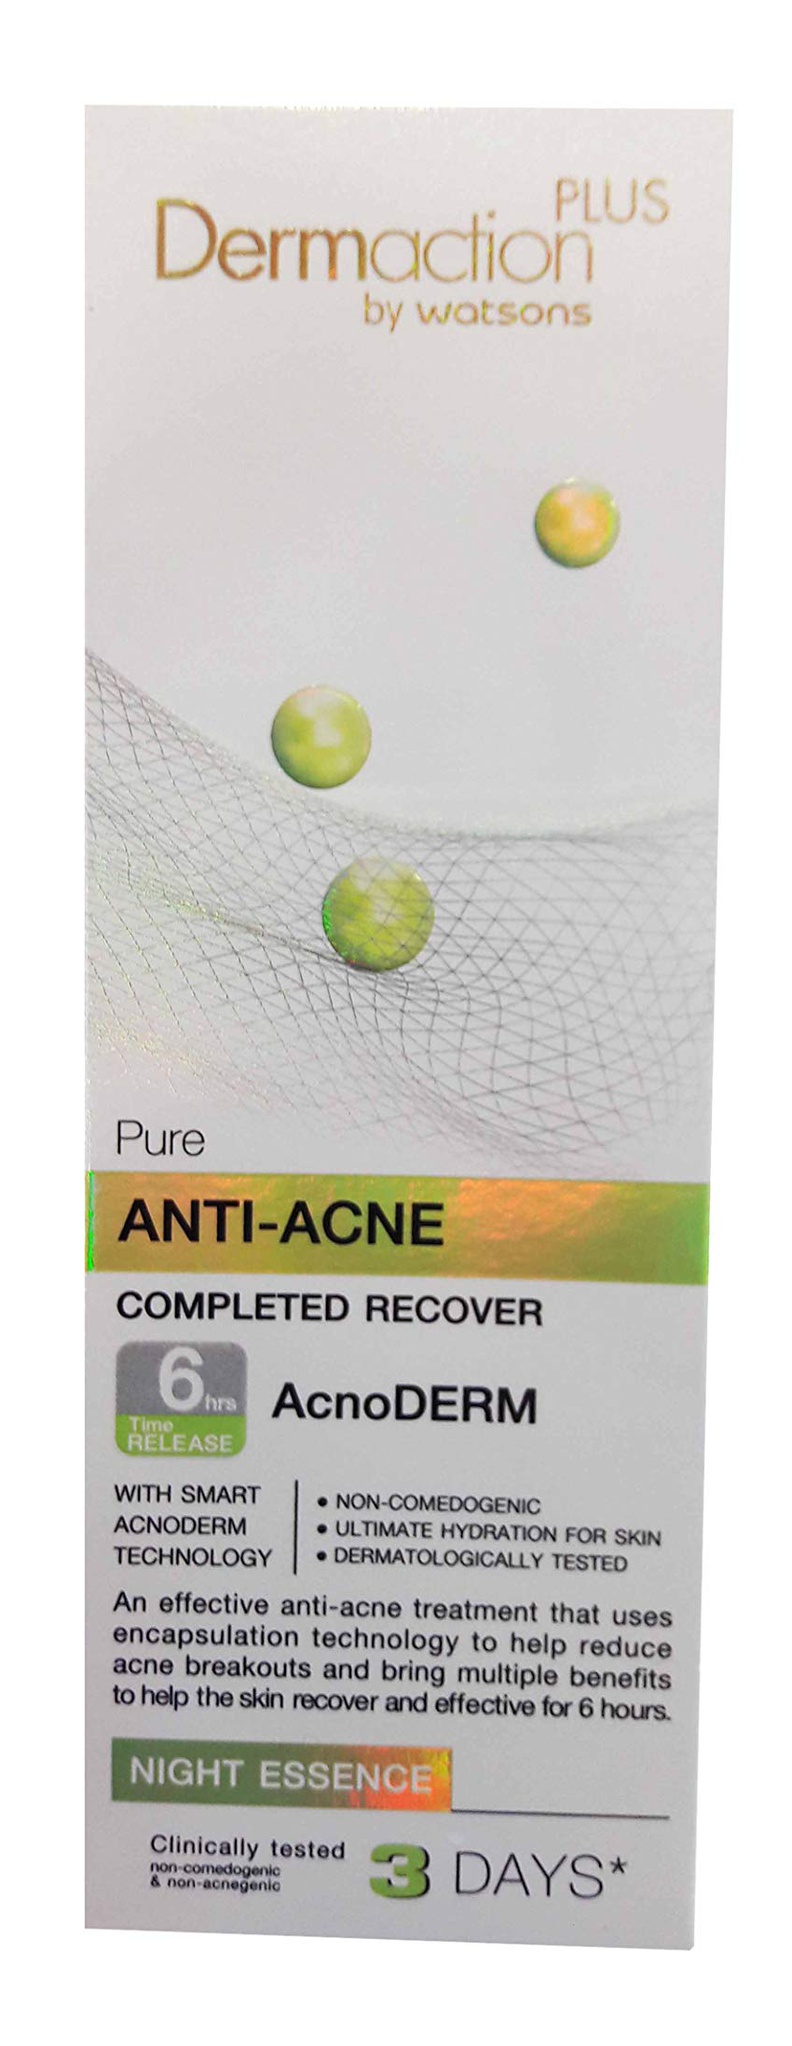 Dermaction Plus by Watsons Pure Anti-Acne Completed Recover Night Essence